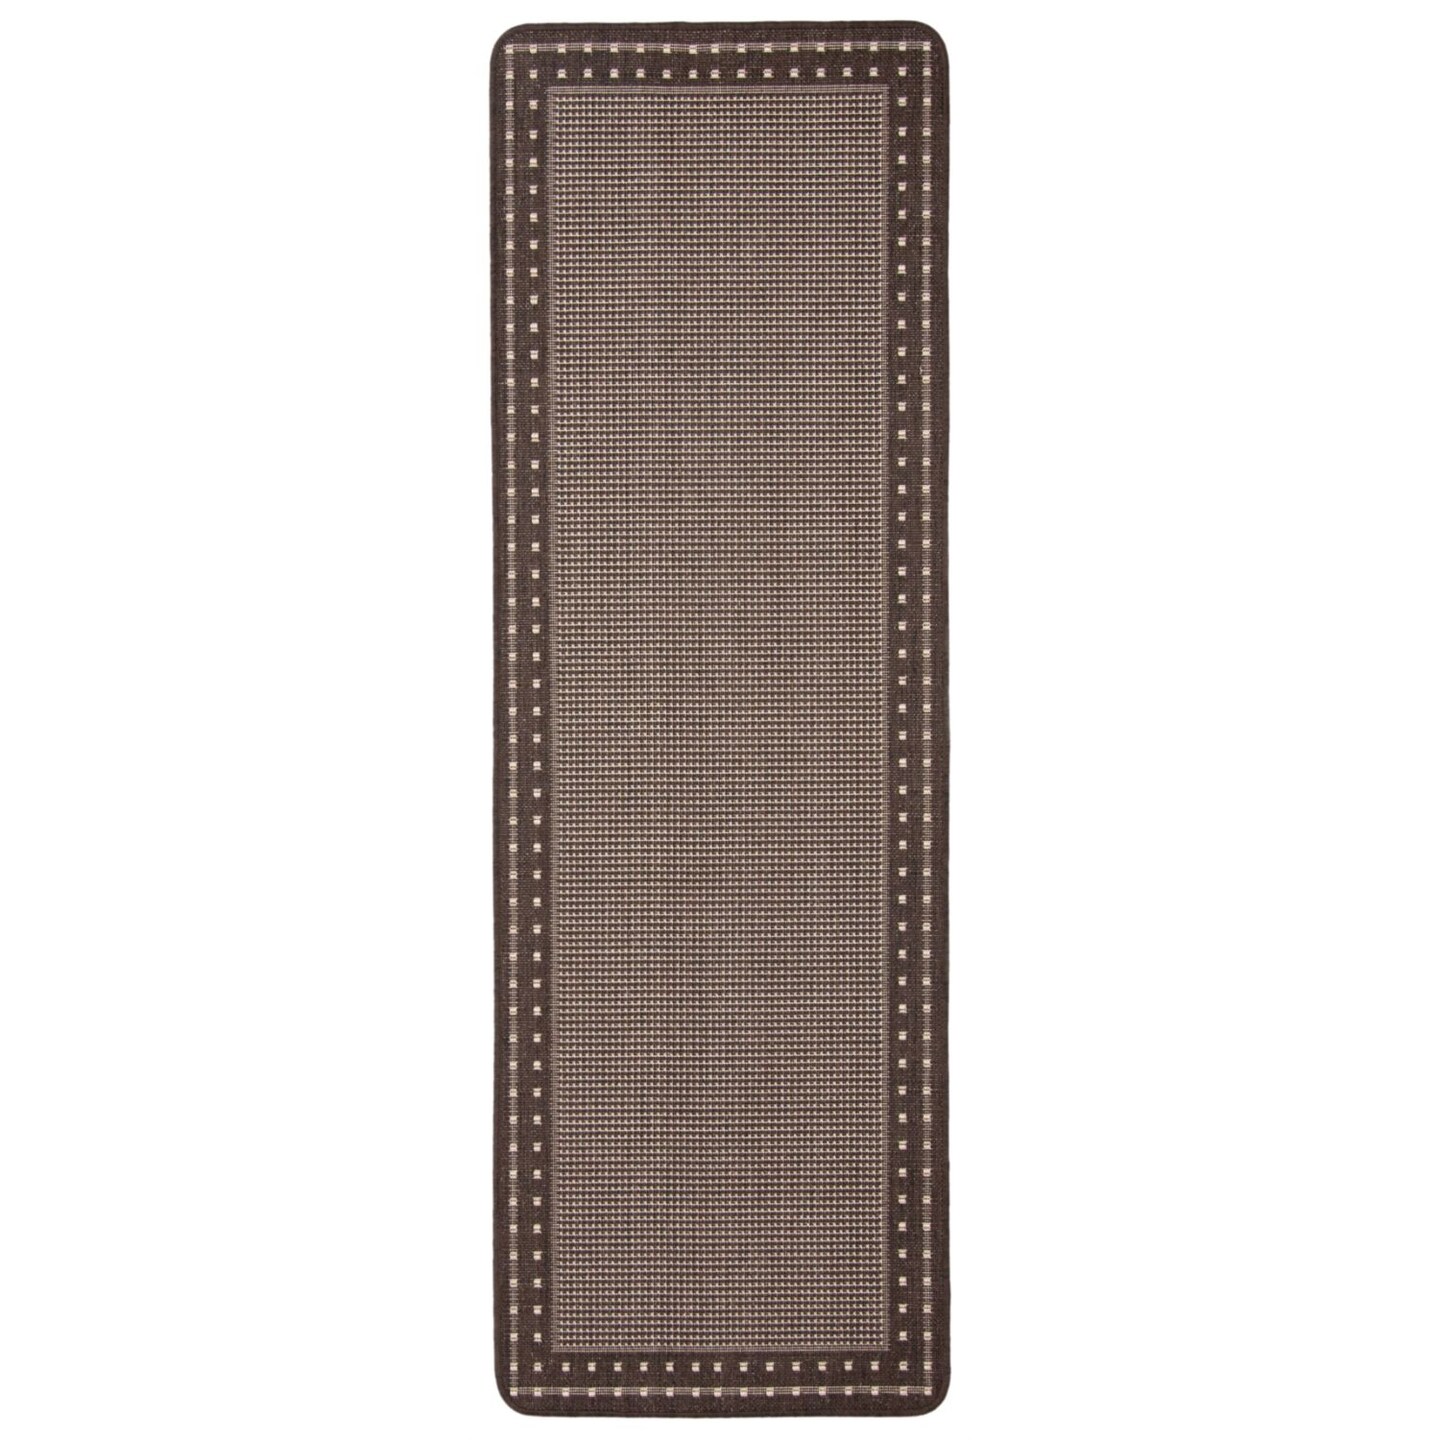 Chaudhary Living 2&#x27; x 6.5&#x27; Bordered Outdoor Area Throw Rug Runner - Chocolate Brown